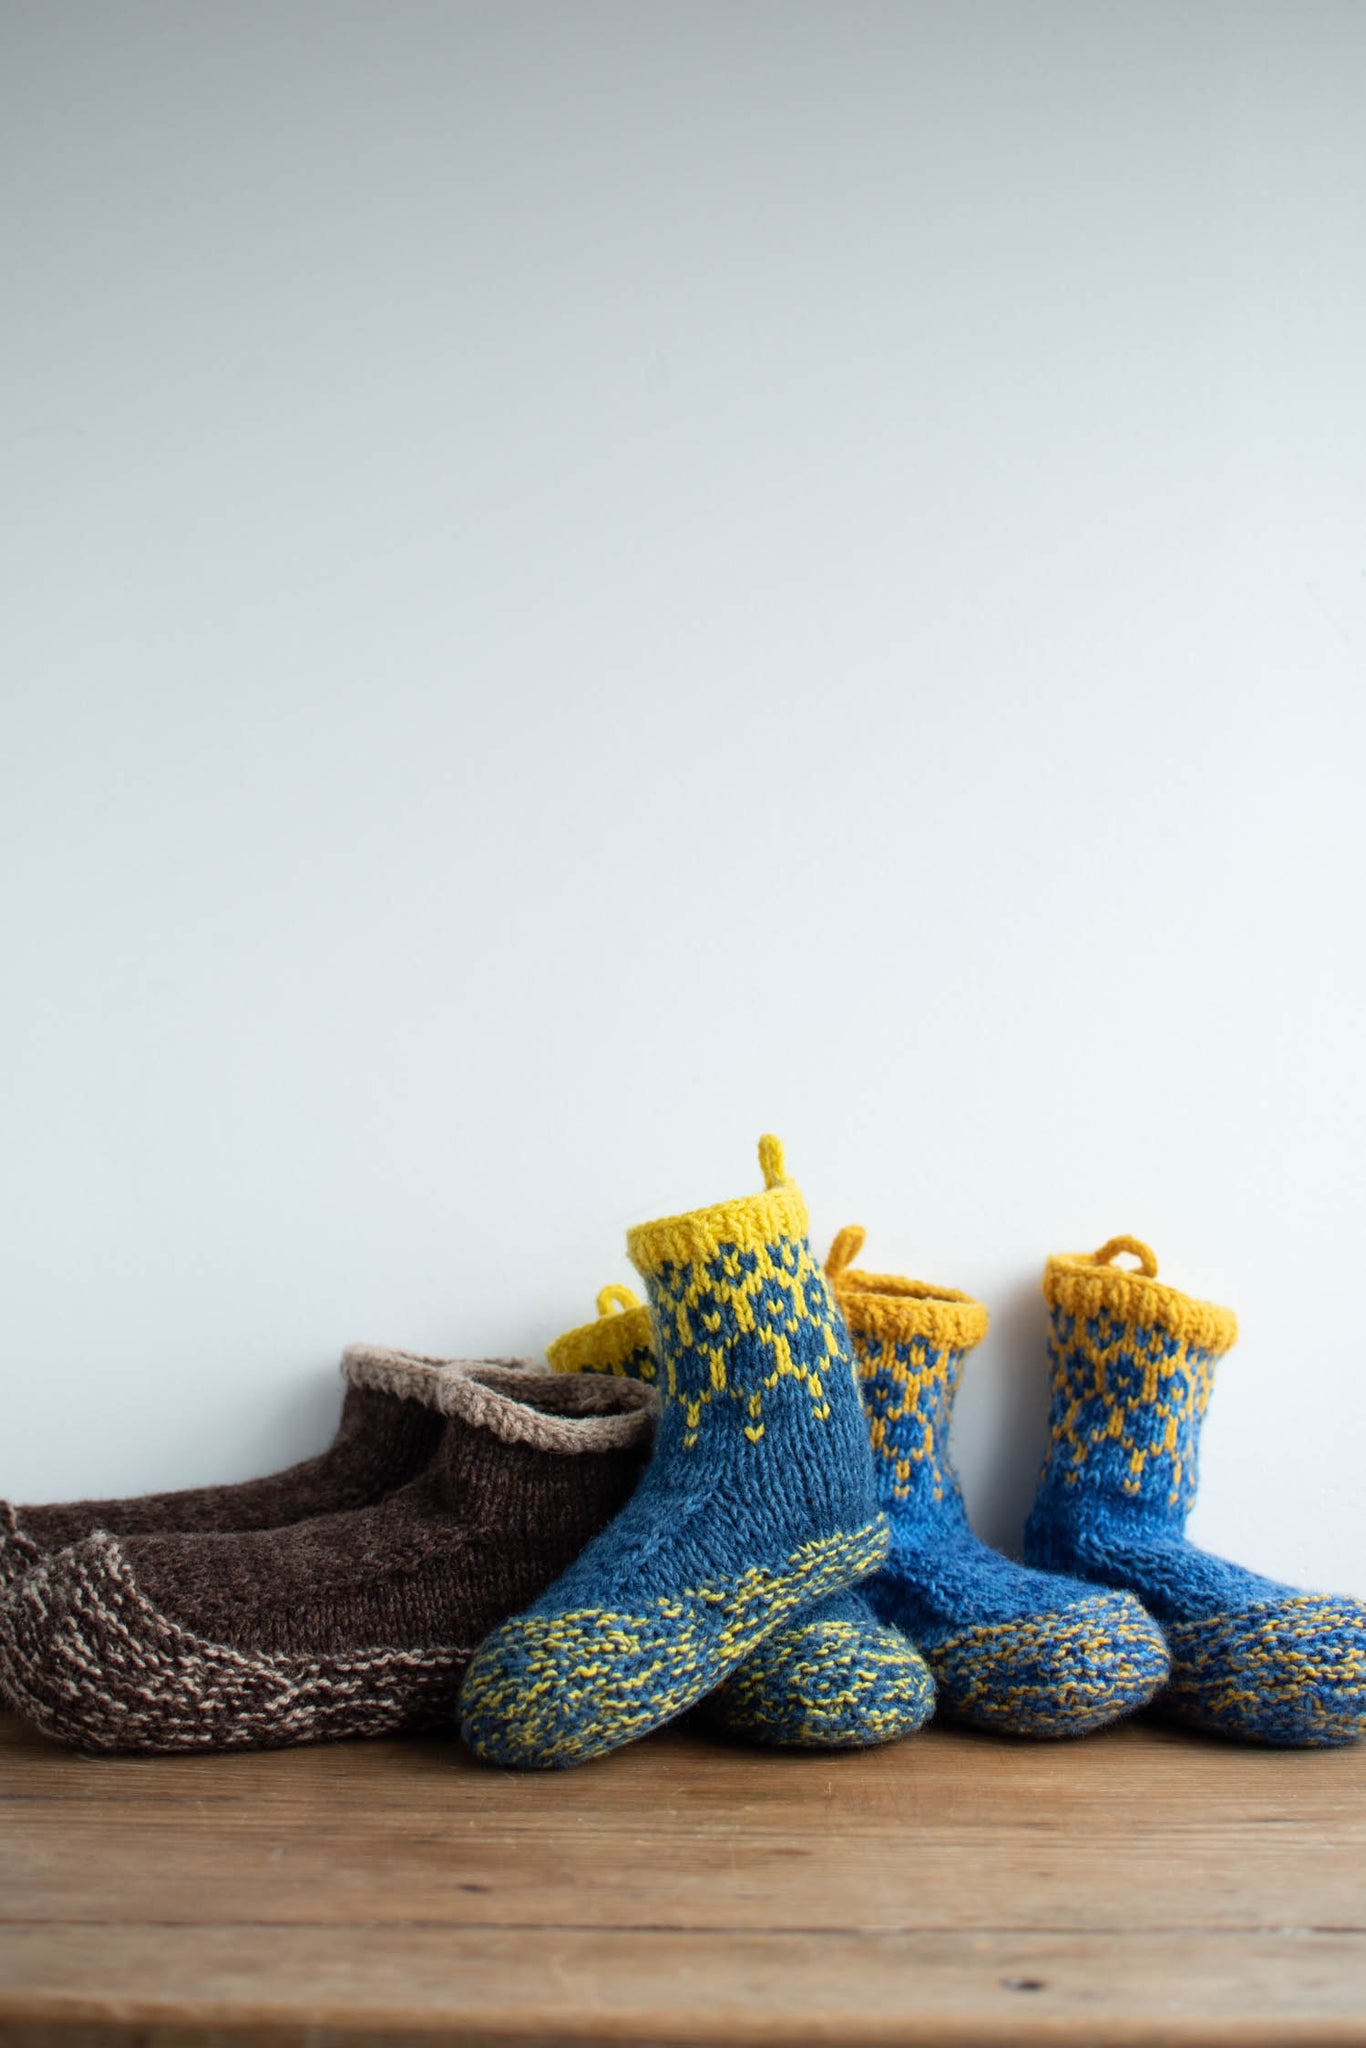 3 pairs of slippers, 2 in slightly different tones of blue and yellow, 1 in brown and beige